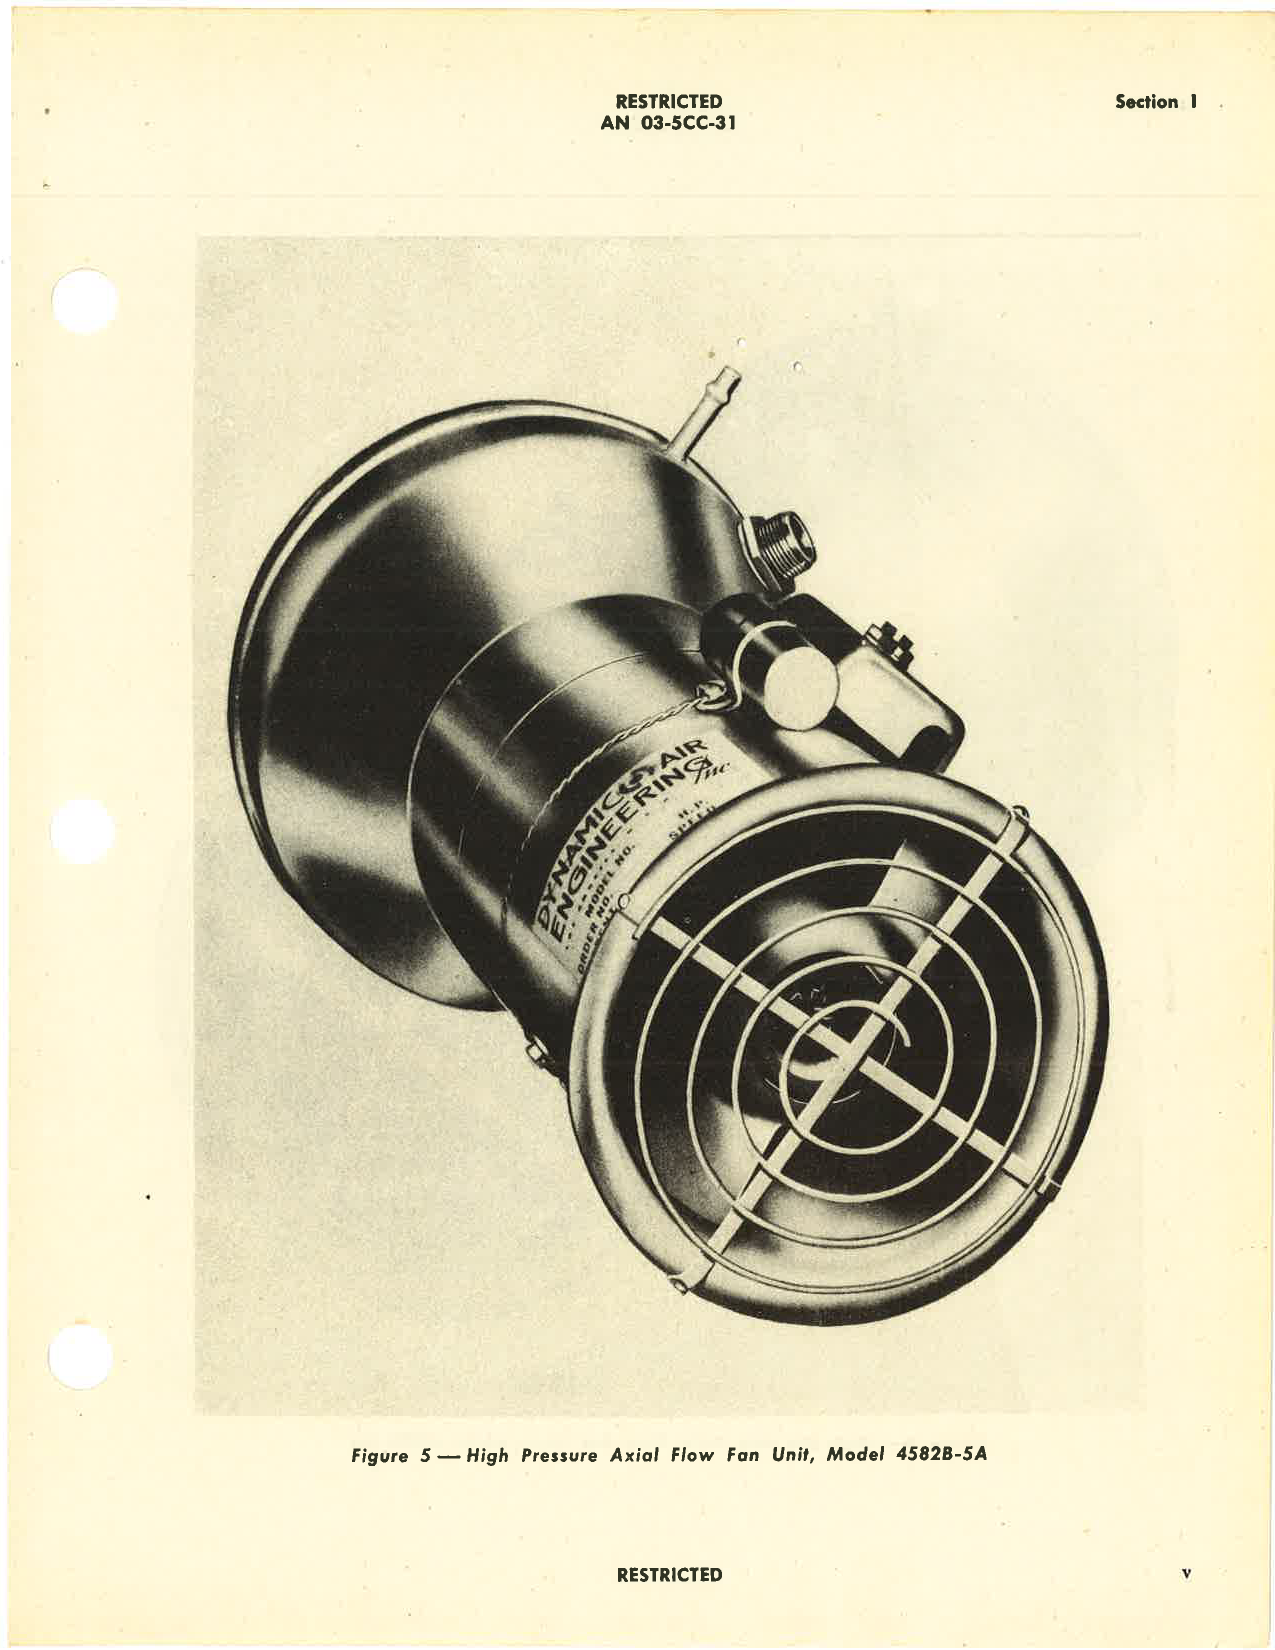 Sample page 7 from AirCorps Library document: Overhaul Instructions with Parts Catalog for High Pressure Axial Flow Fan Units